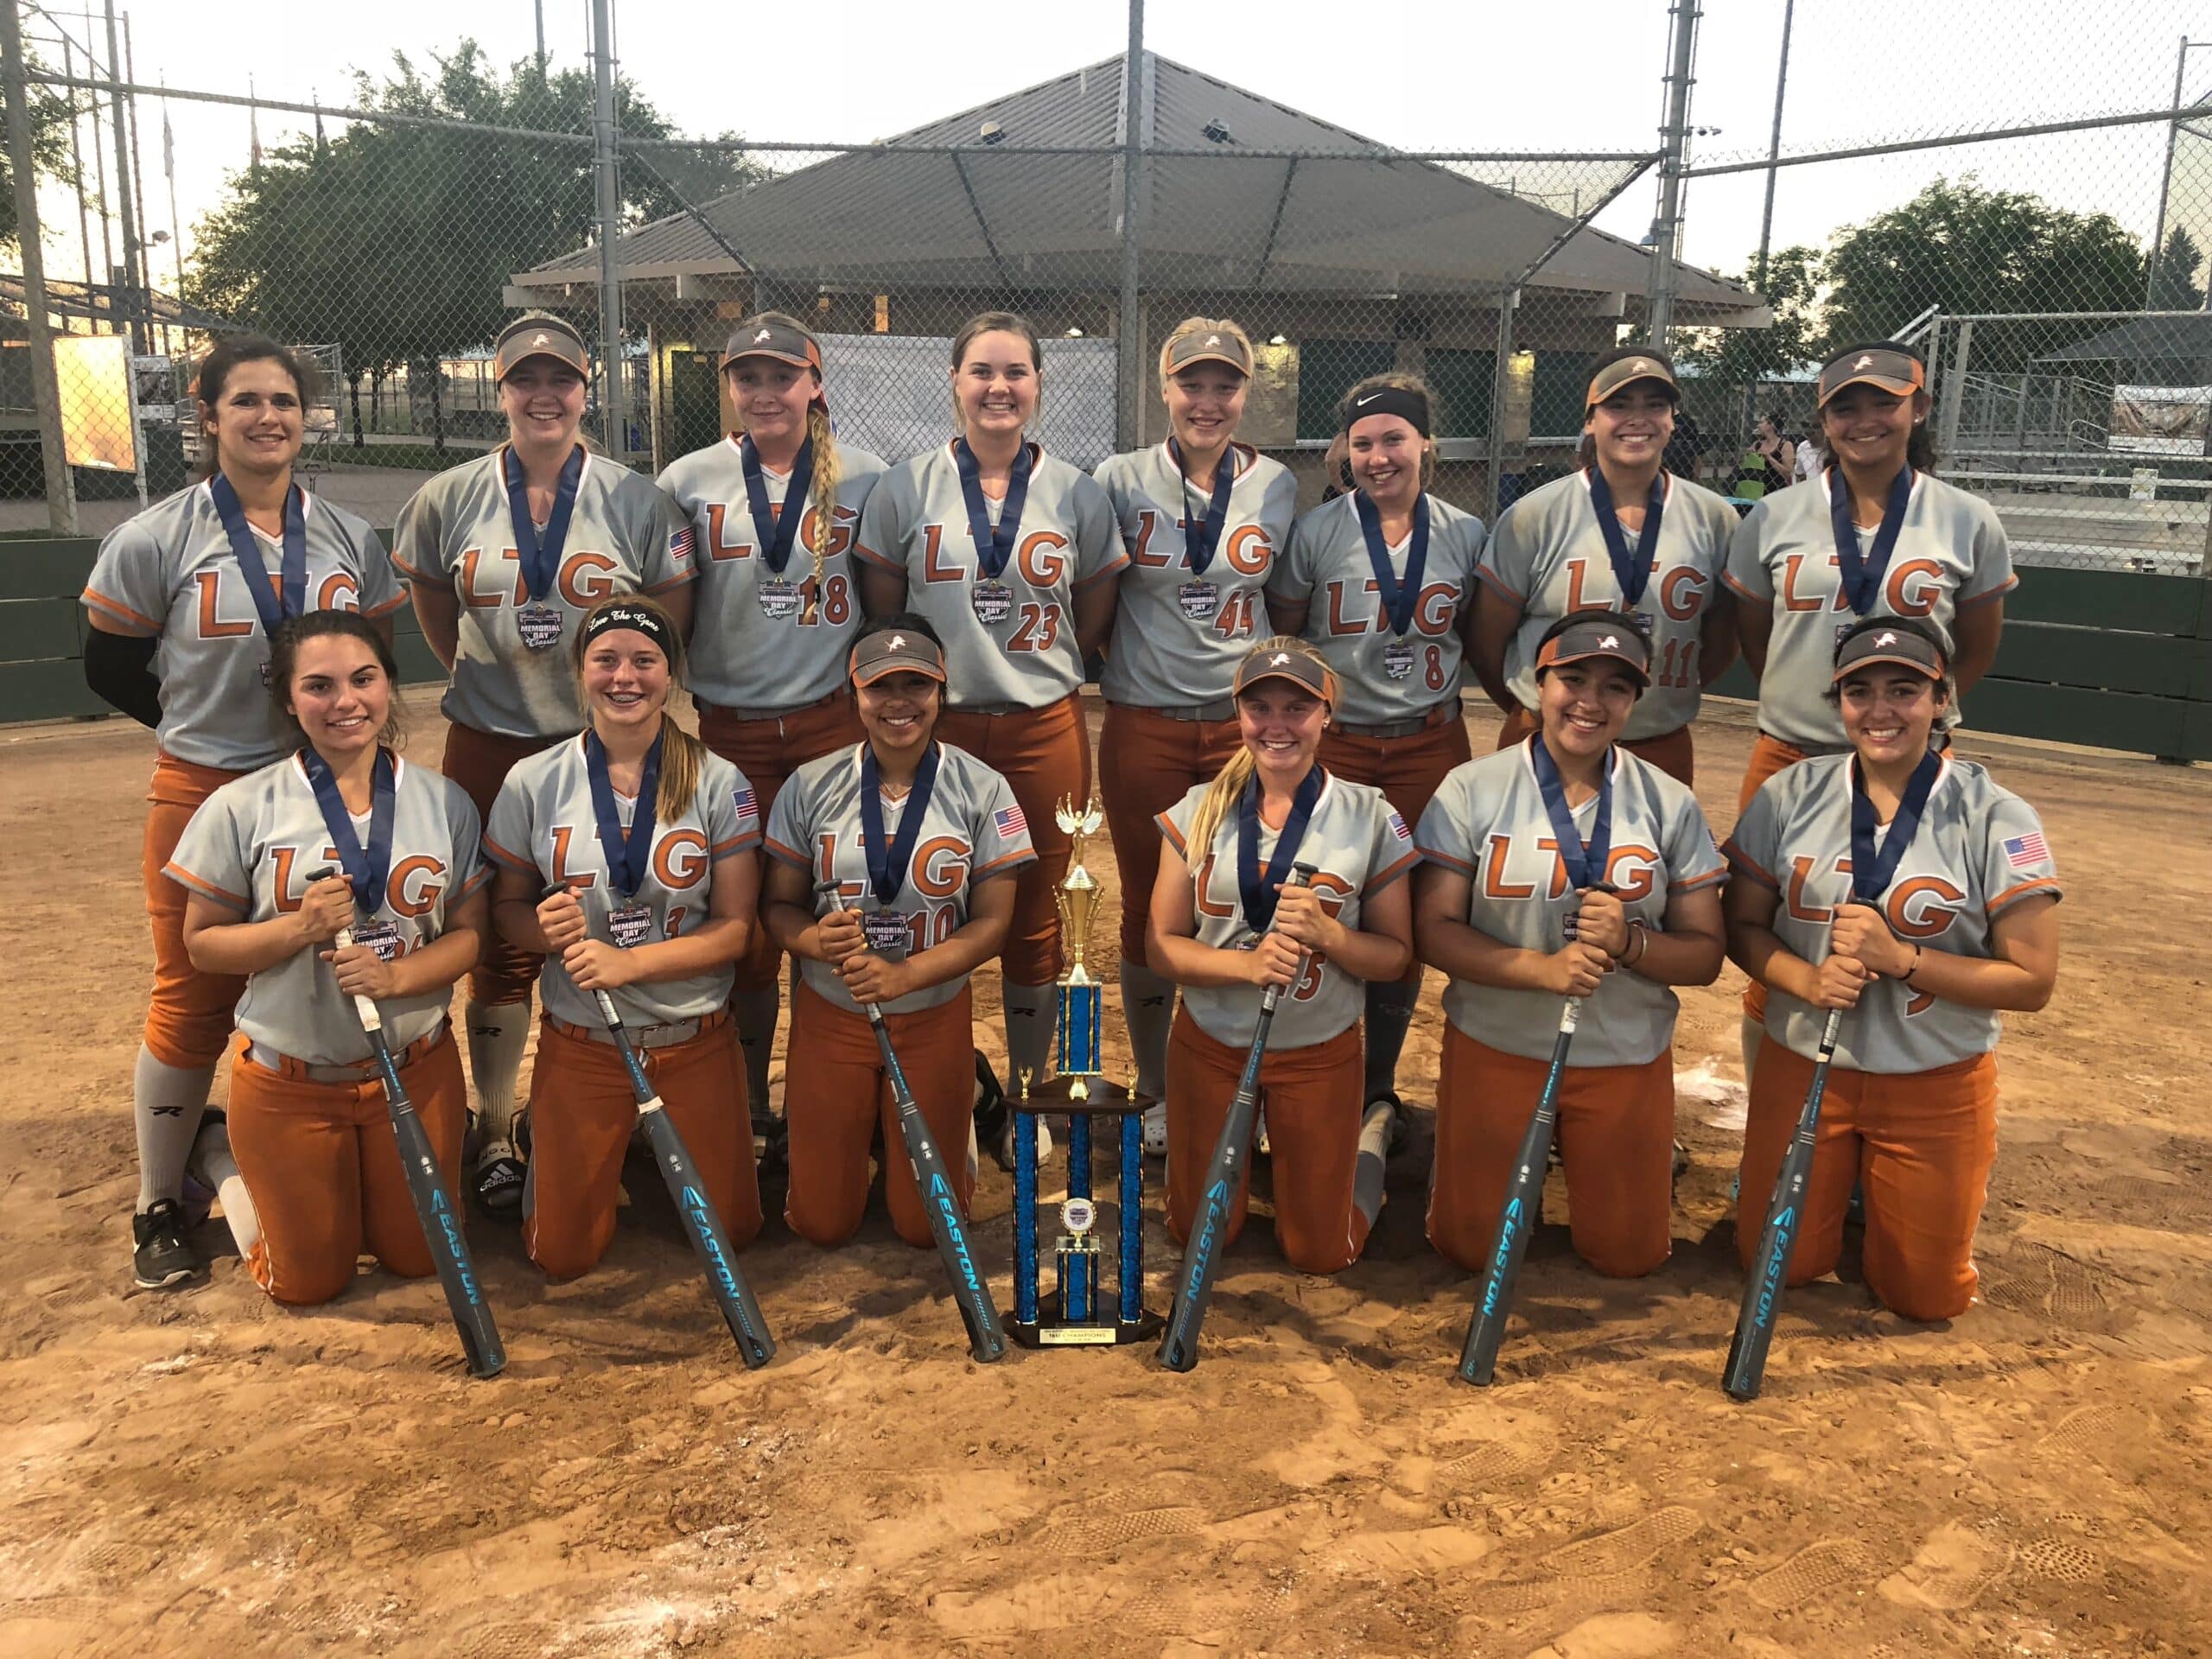 LTG 16U Henderson/Lively Team Finishes 1st Place in the USA Softball Memorial Day Classic